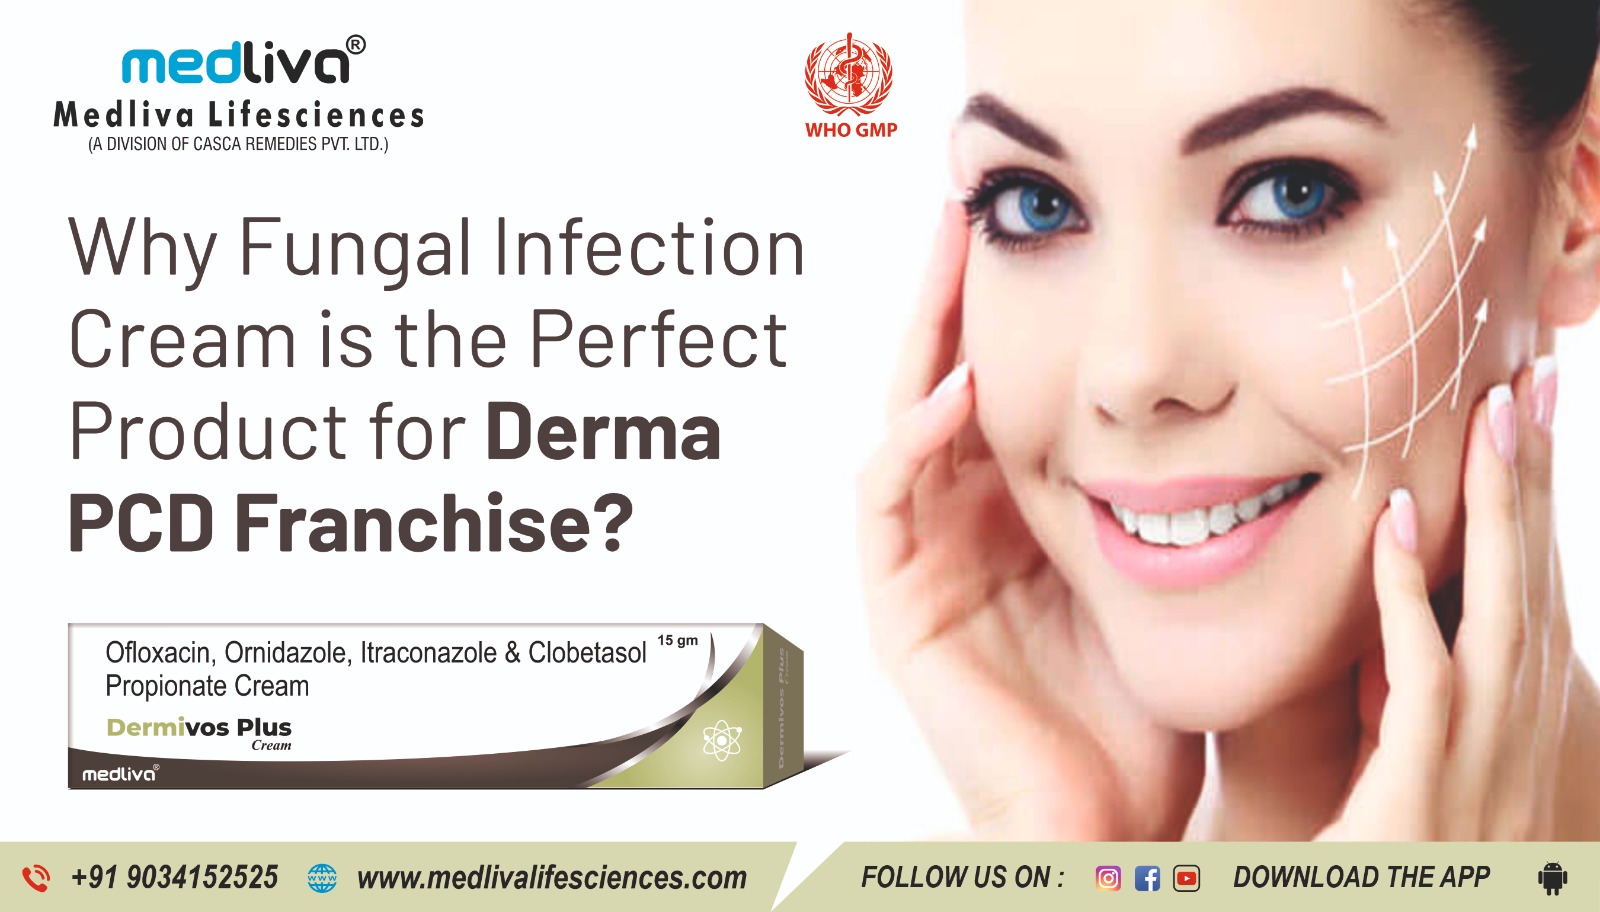 Why Fungal Infection Cream is the Perfect Product for Derma PCD Franchise?